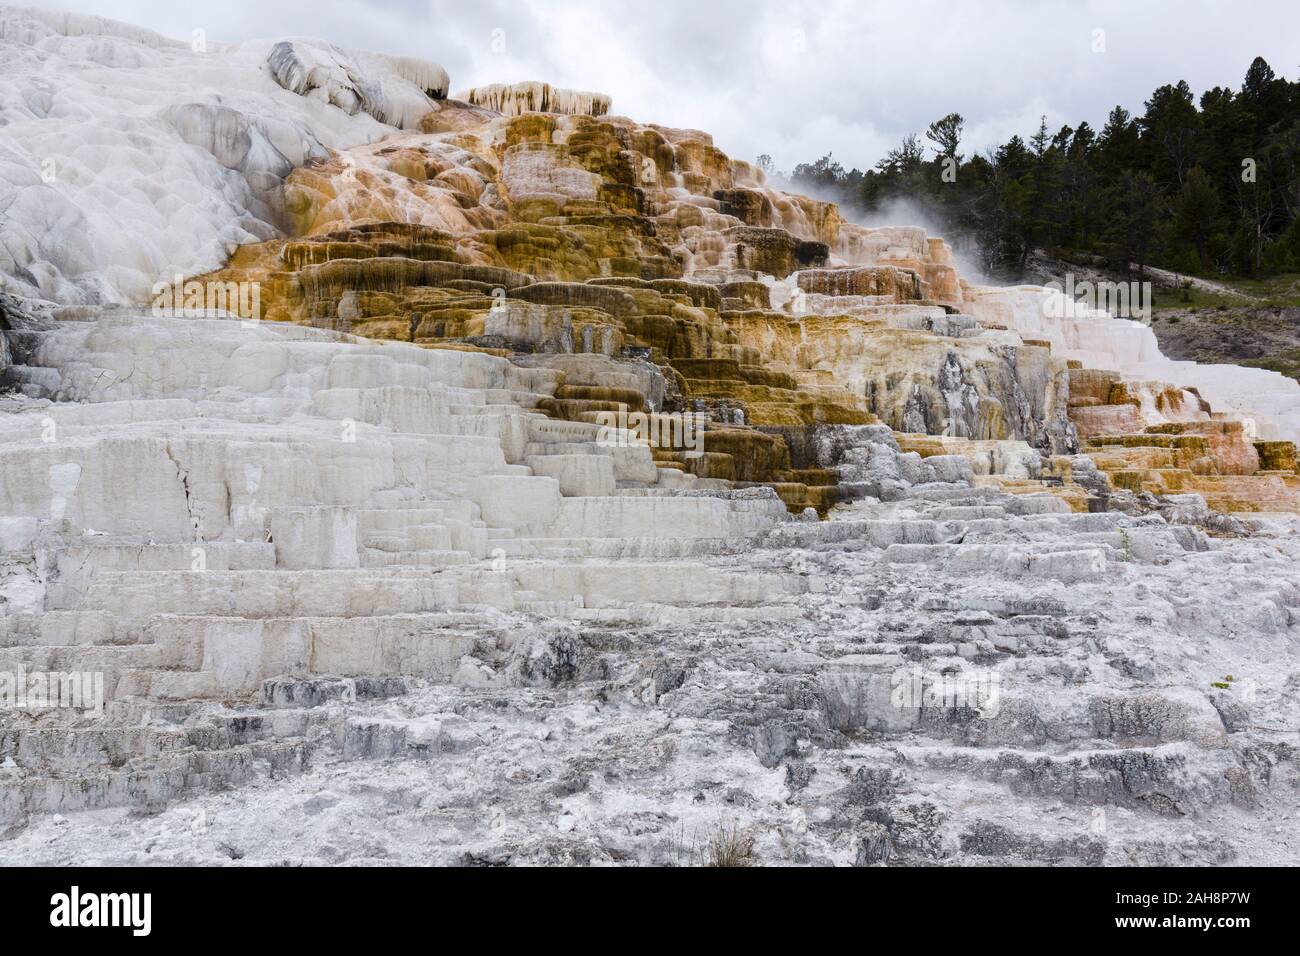 Mammoth Lower Terraces, Yellowstone National Park, Wyoming, United States Stock Photo